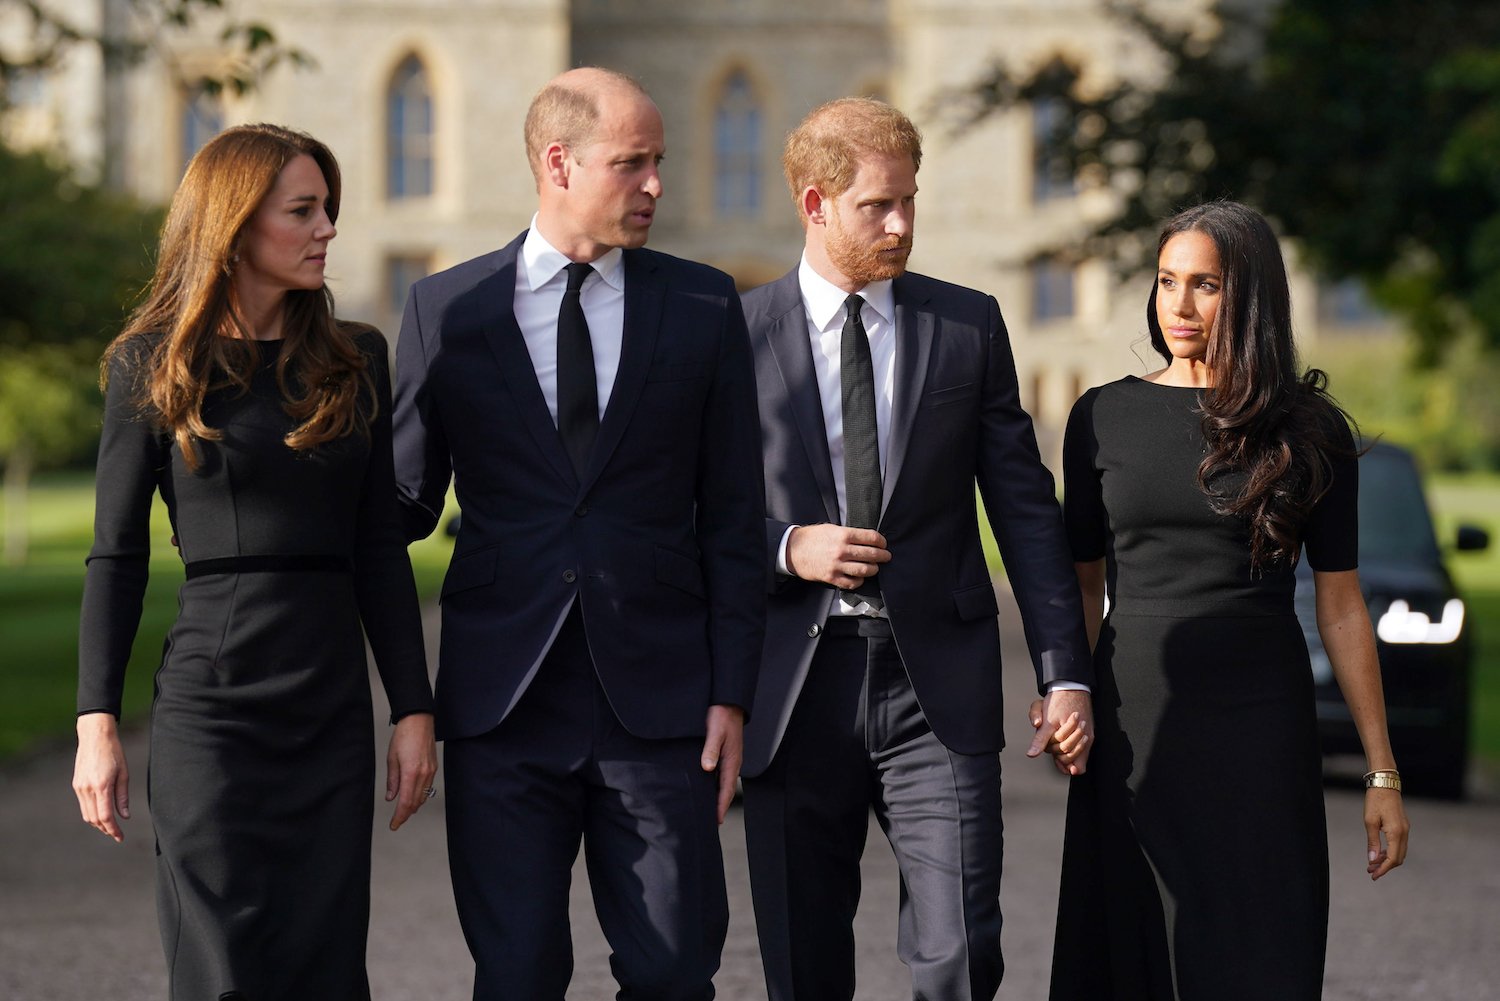 Meghan Markle’s Subtle Gesture During Appearance Proves She Supports Prince William and Kate Middleton, Body Language Expert Says